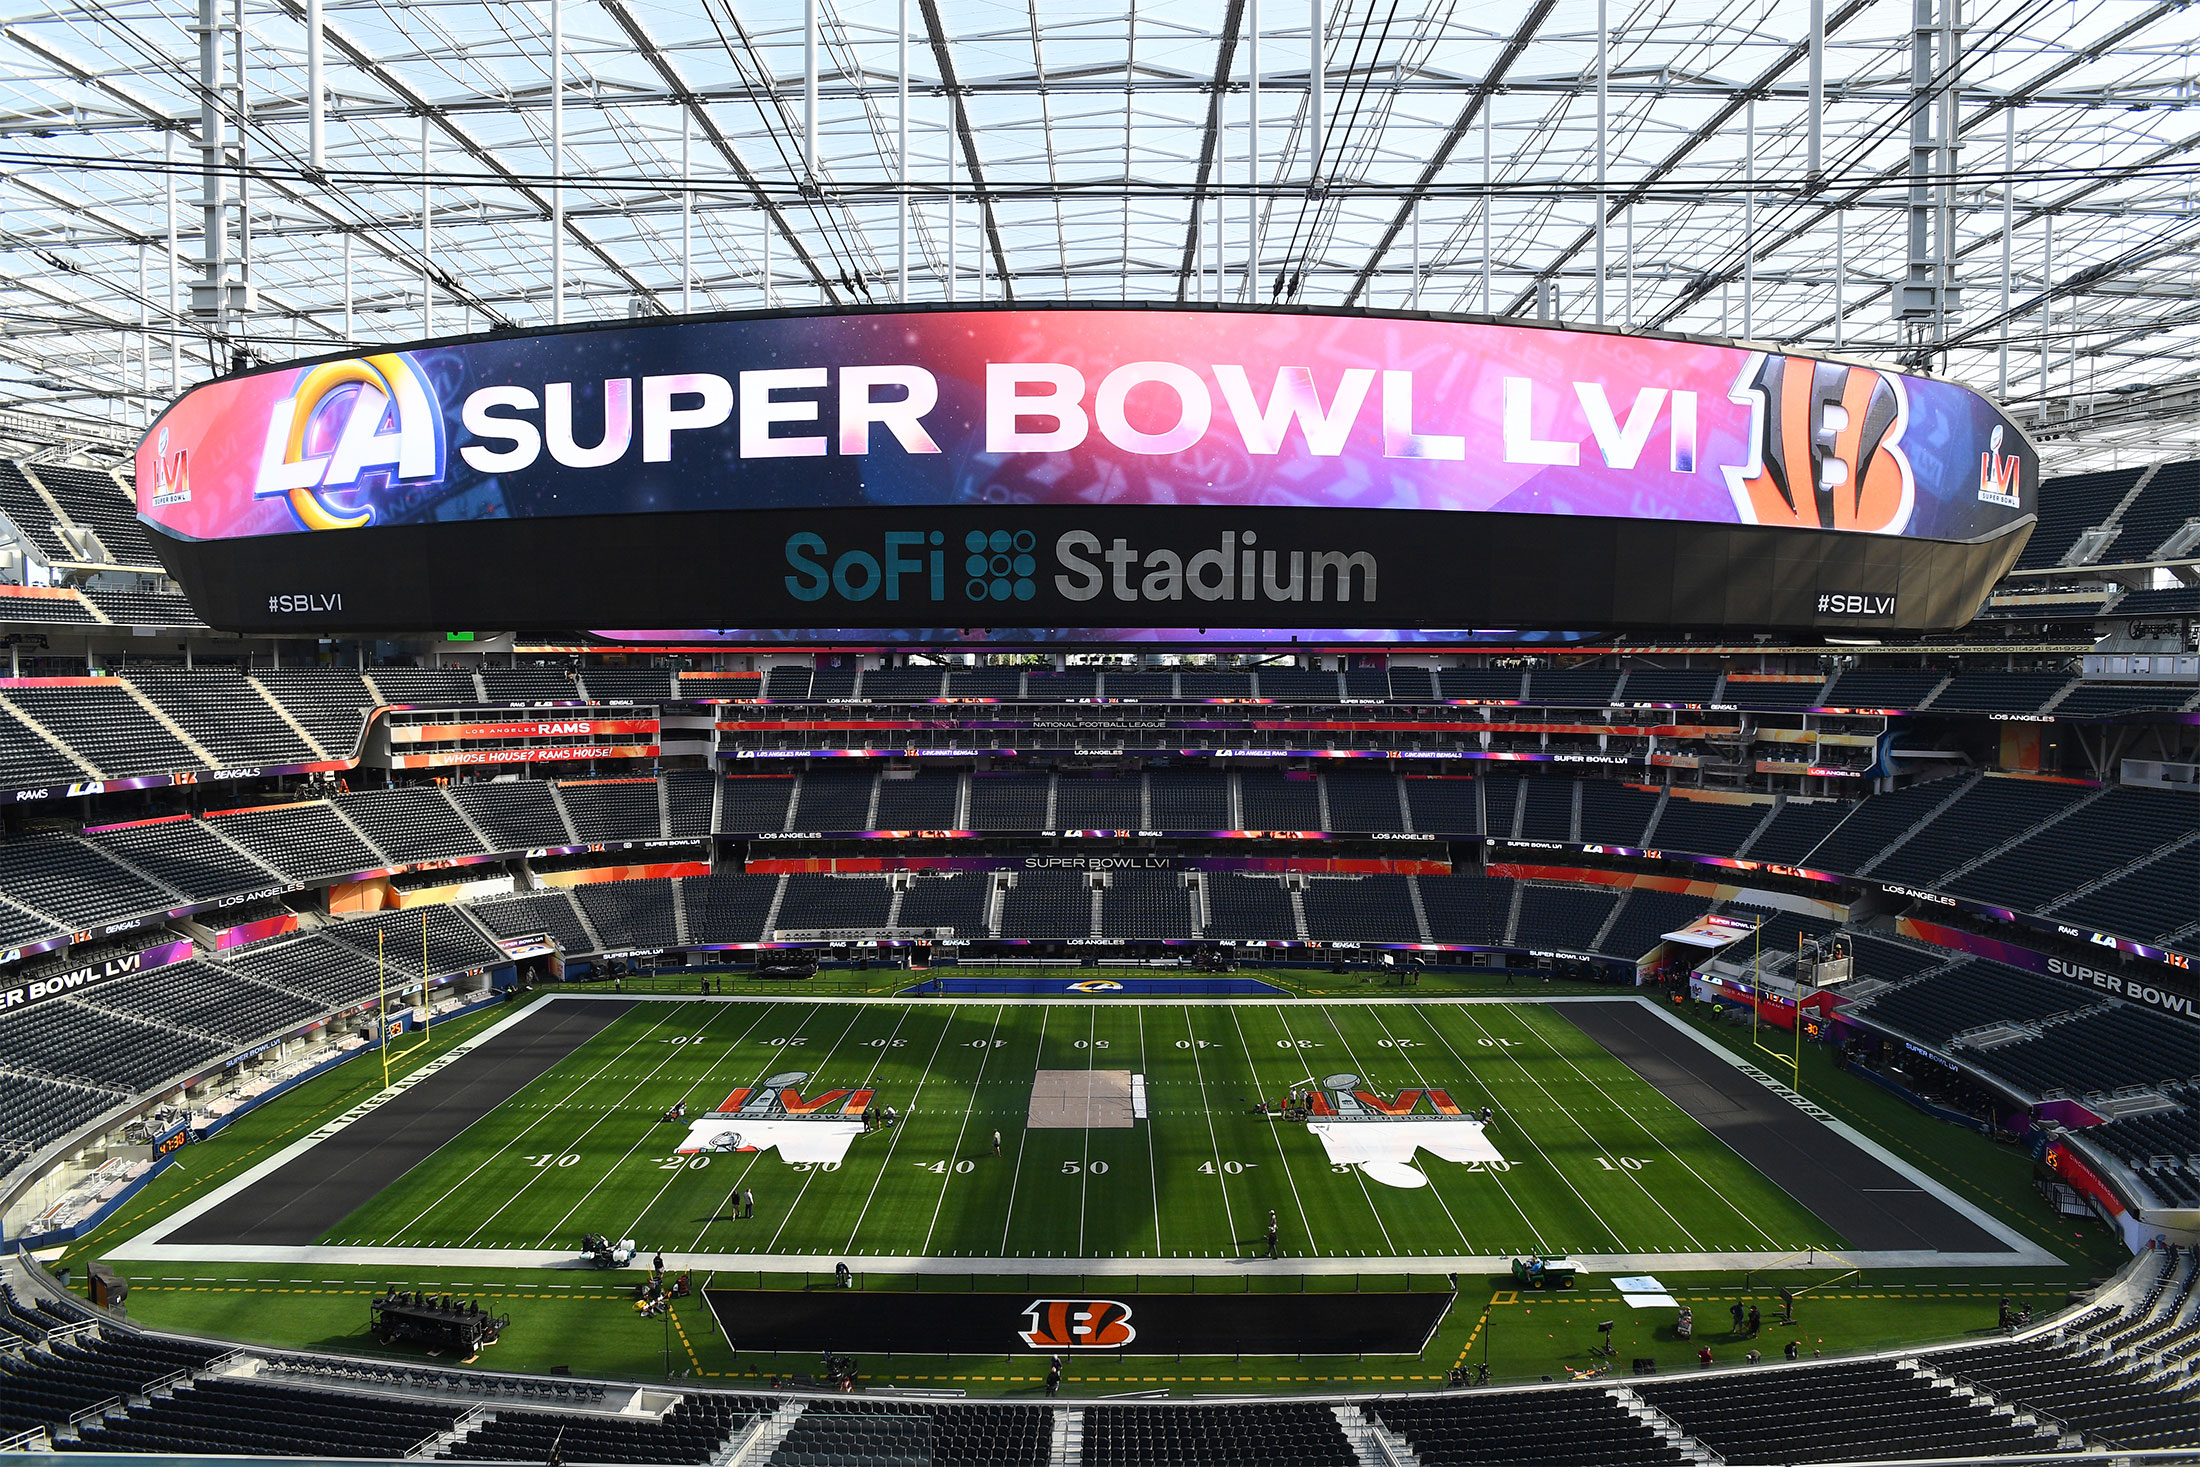 how much was the super bowl tickets for 2022